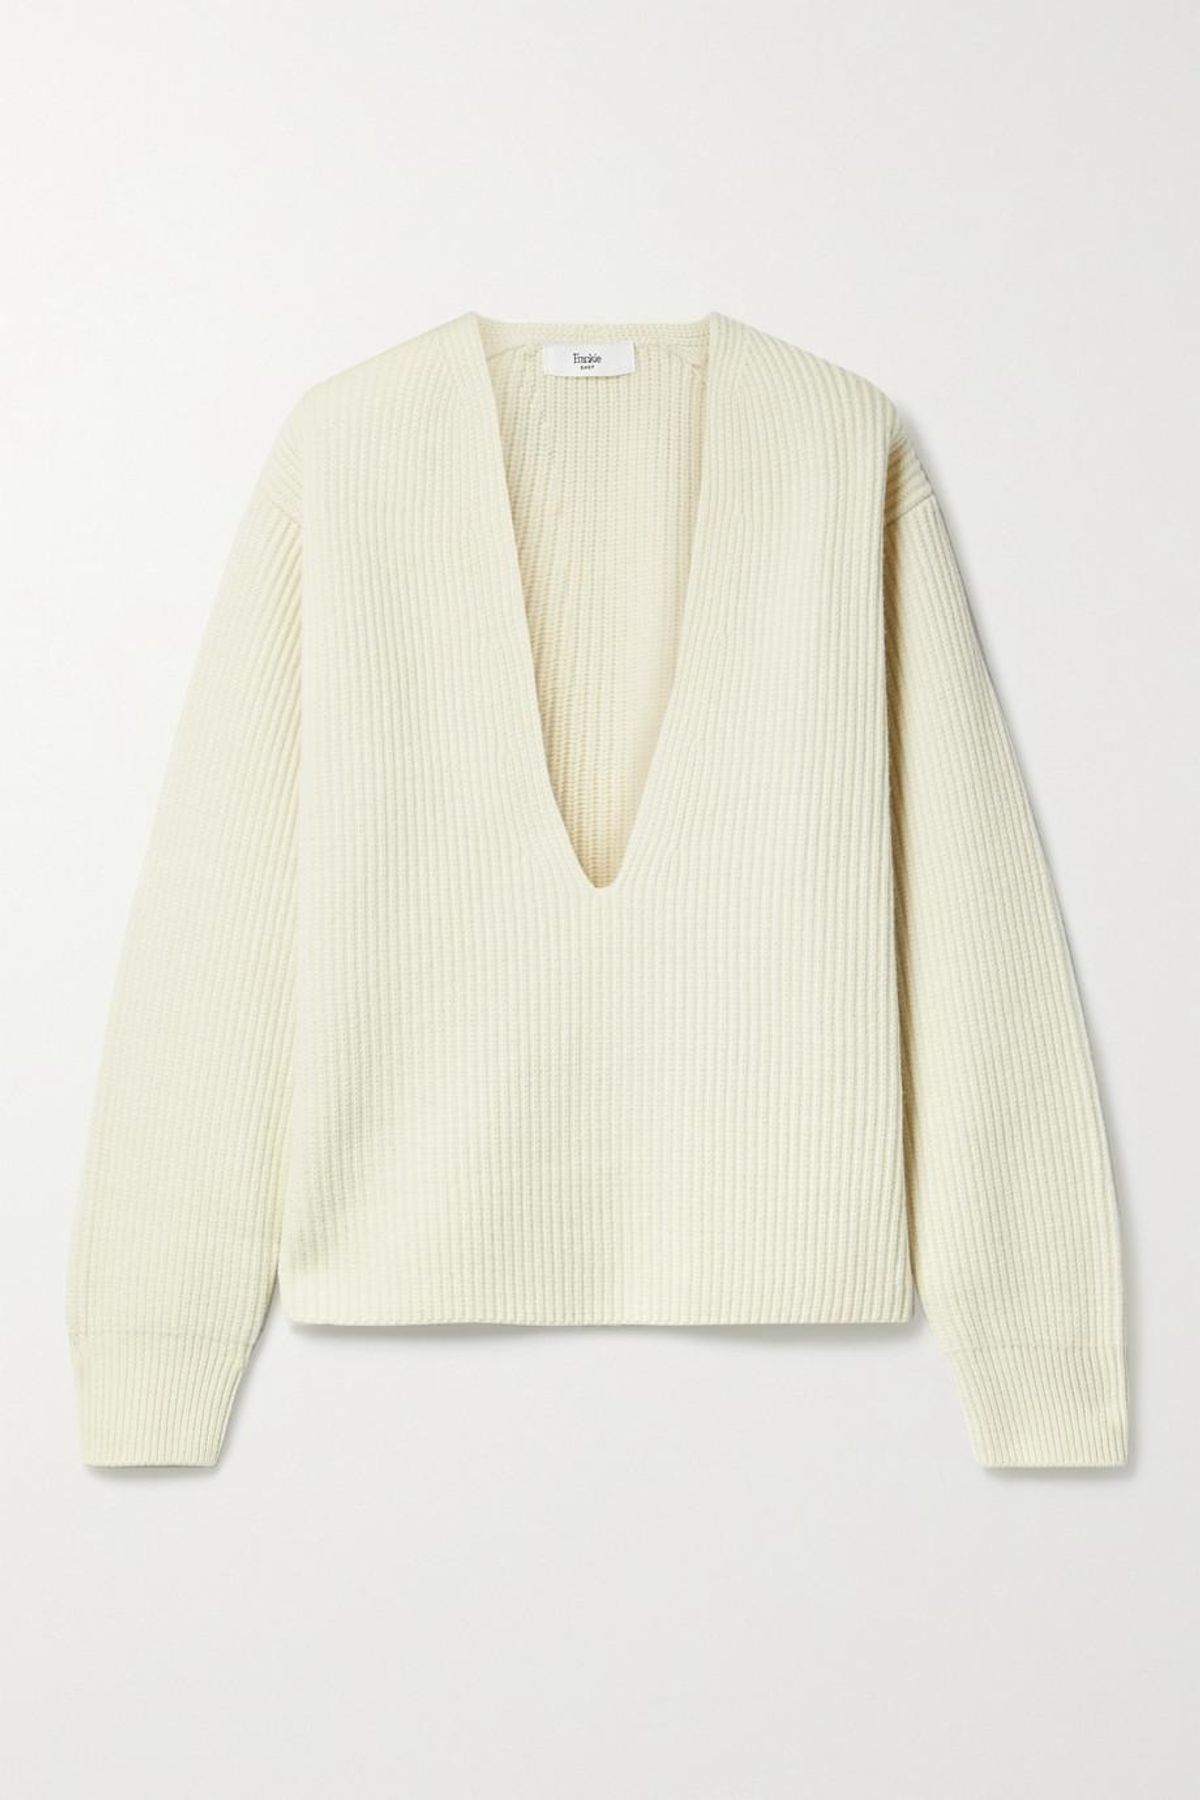 the frankie shop ribbed wool sweater